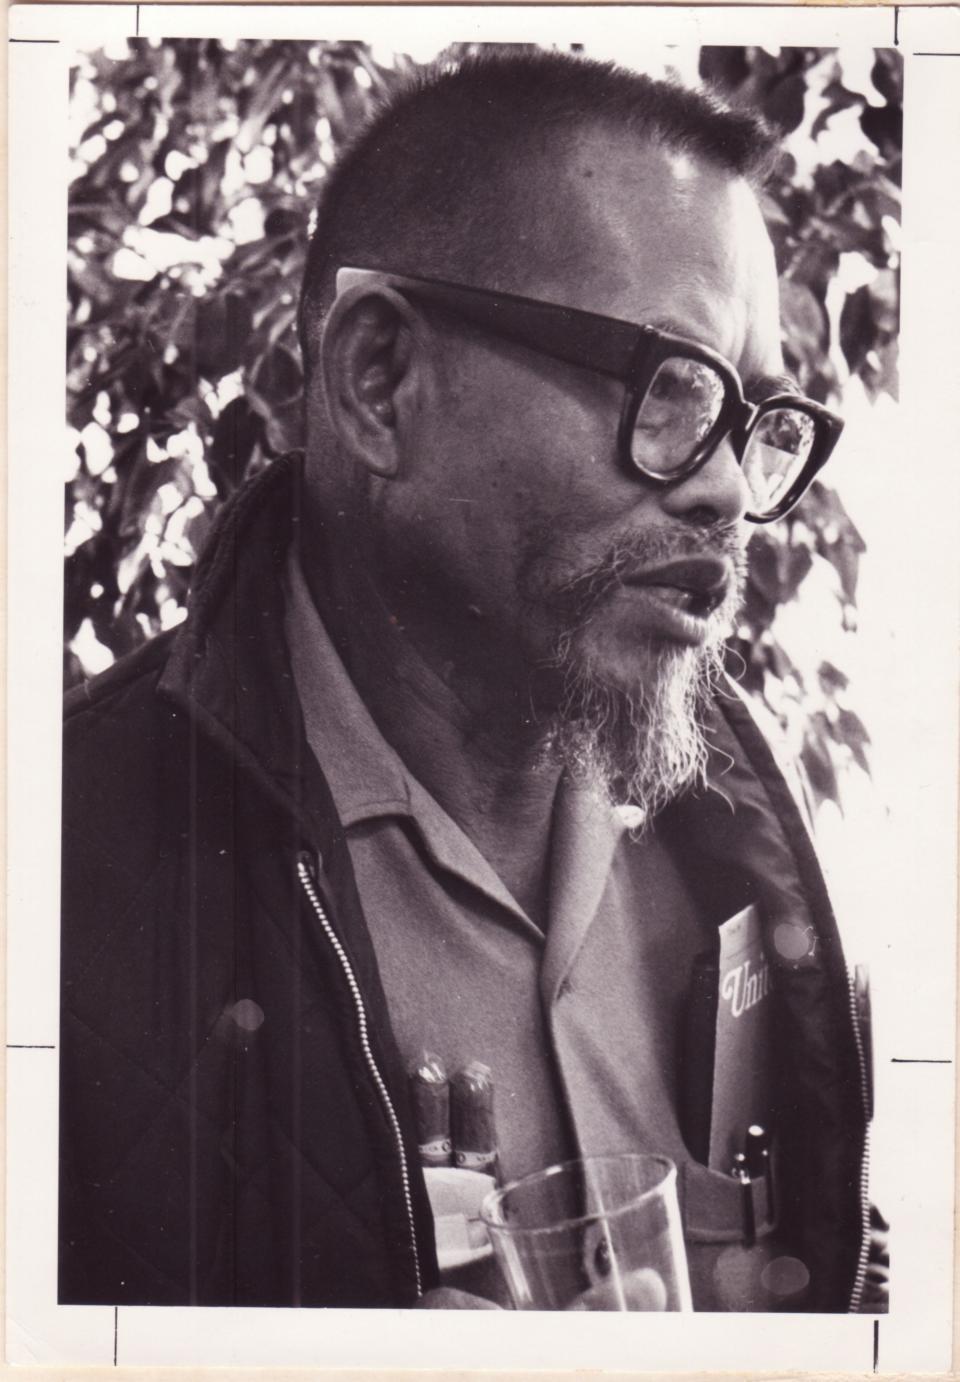 Larry Itliong (1913 – 1977), also known as "Seven Fingers", organized West Coast agricultural workers starting in the 1930s. He was one of the architects of the famous Delano grape strike.Transmission Reference: REC1306211700257239